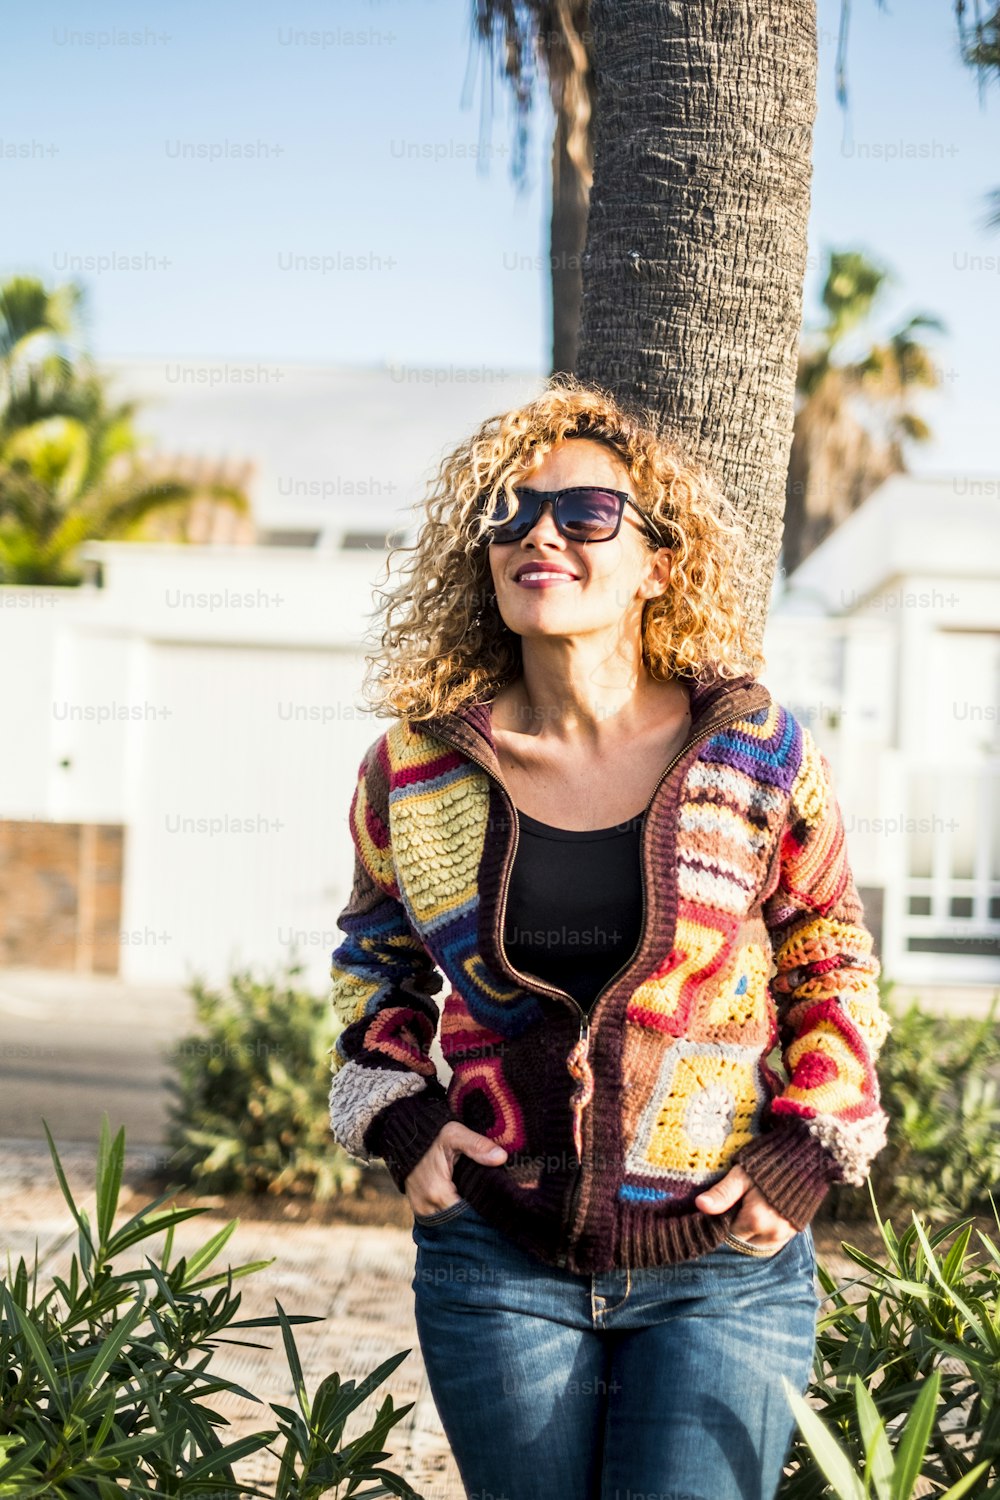 Vertical portrait beautiful curly middle age woman enjoying the sun and the leisure outdoor day activity smiling and resting - trendy fashion clothes and sweater for model casual concept image of happy people